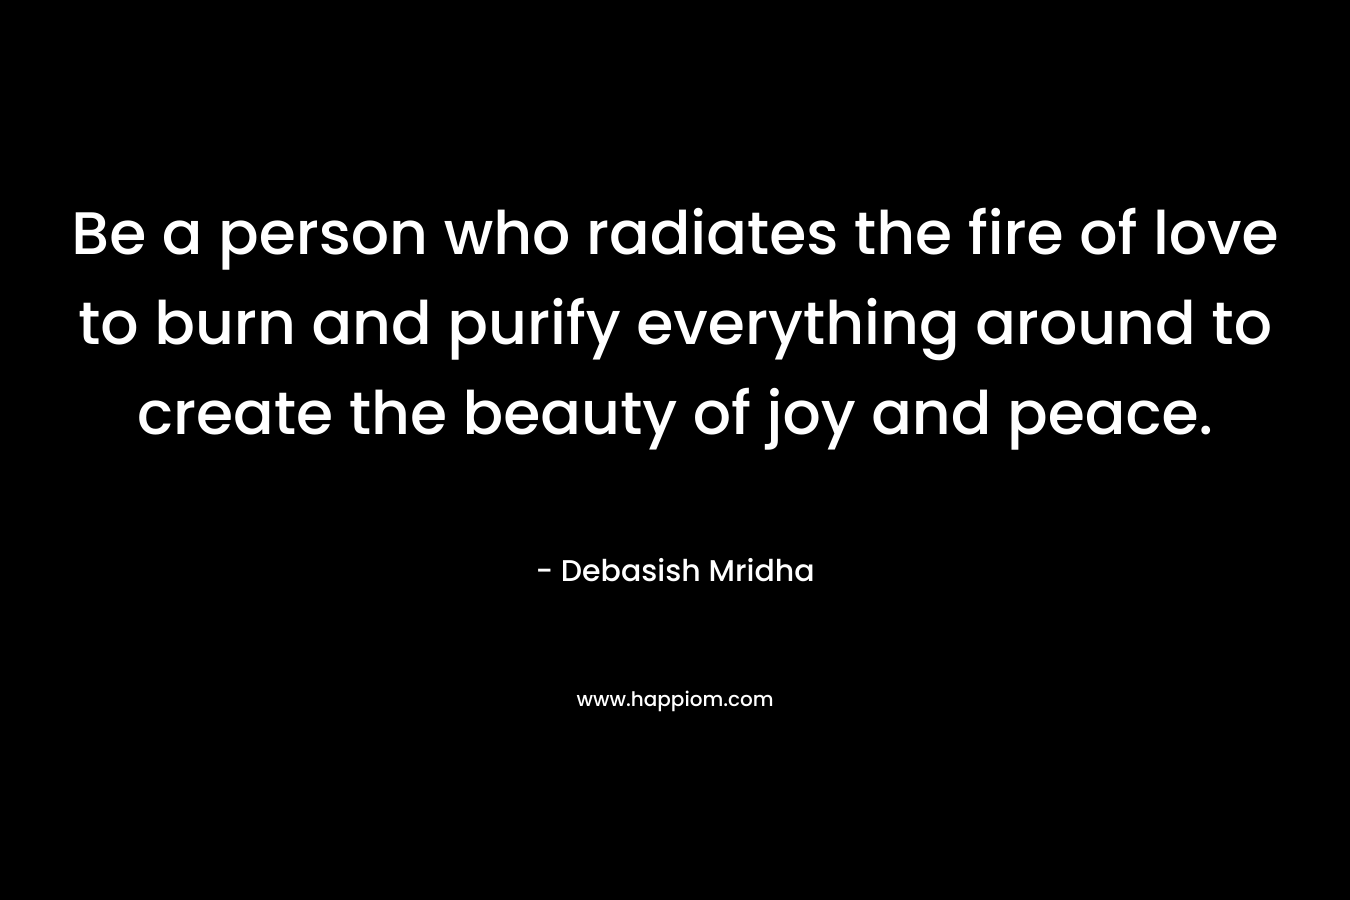 Be a person who radiates the fire of love to burn and purify everything around to create the beauty of joy and peace.